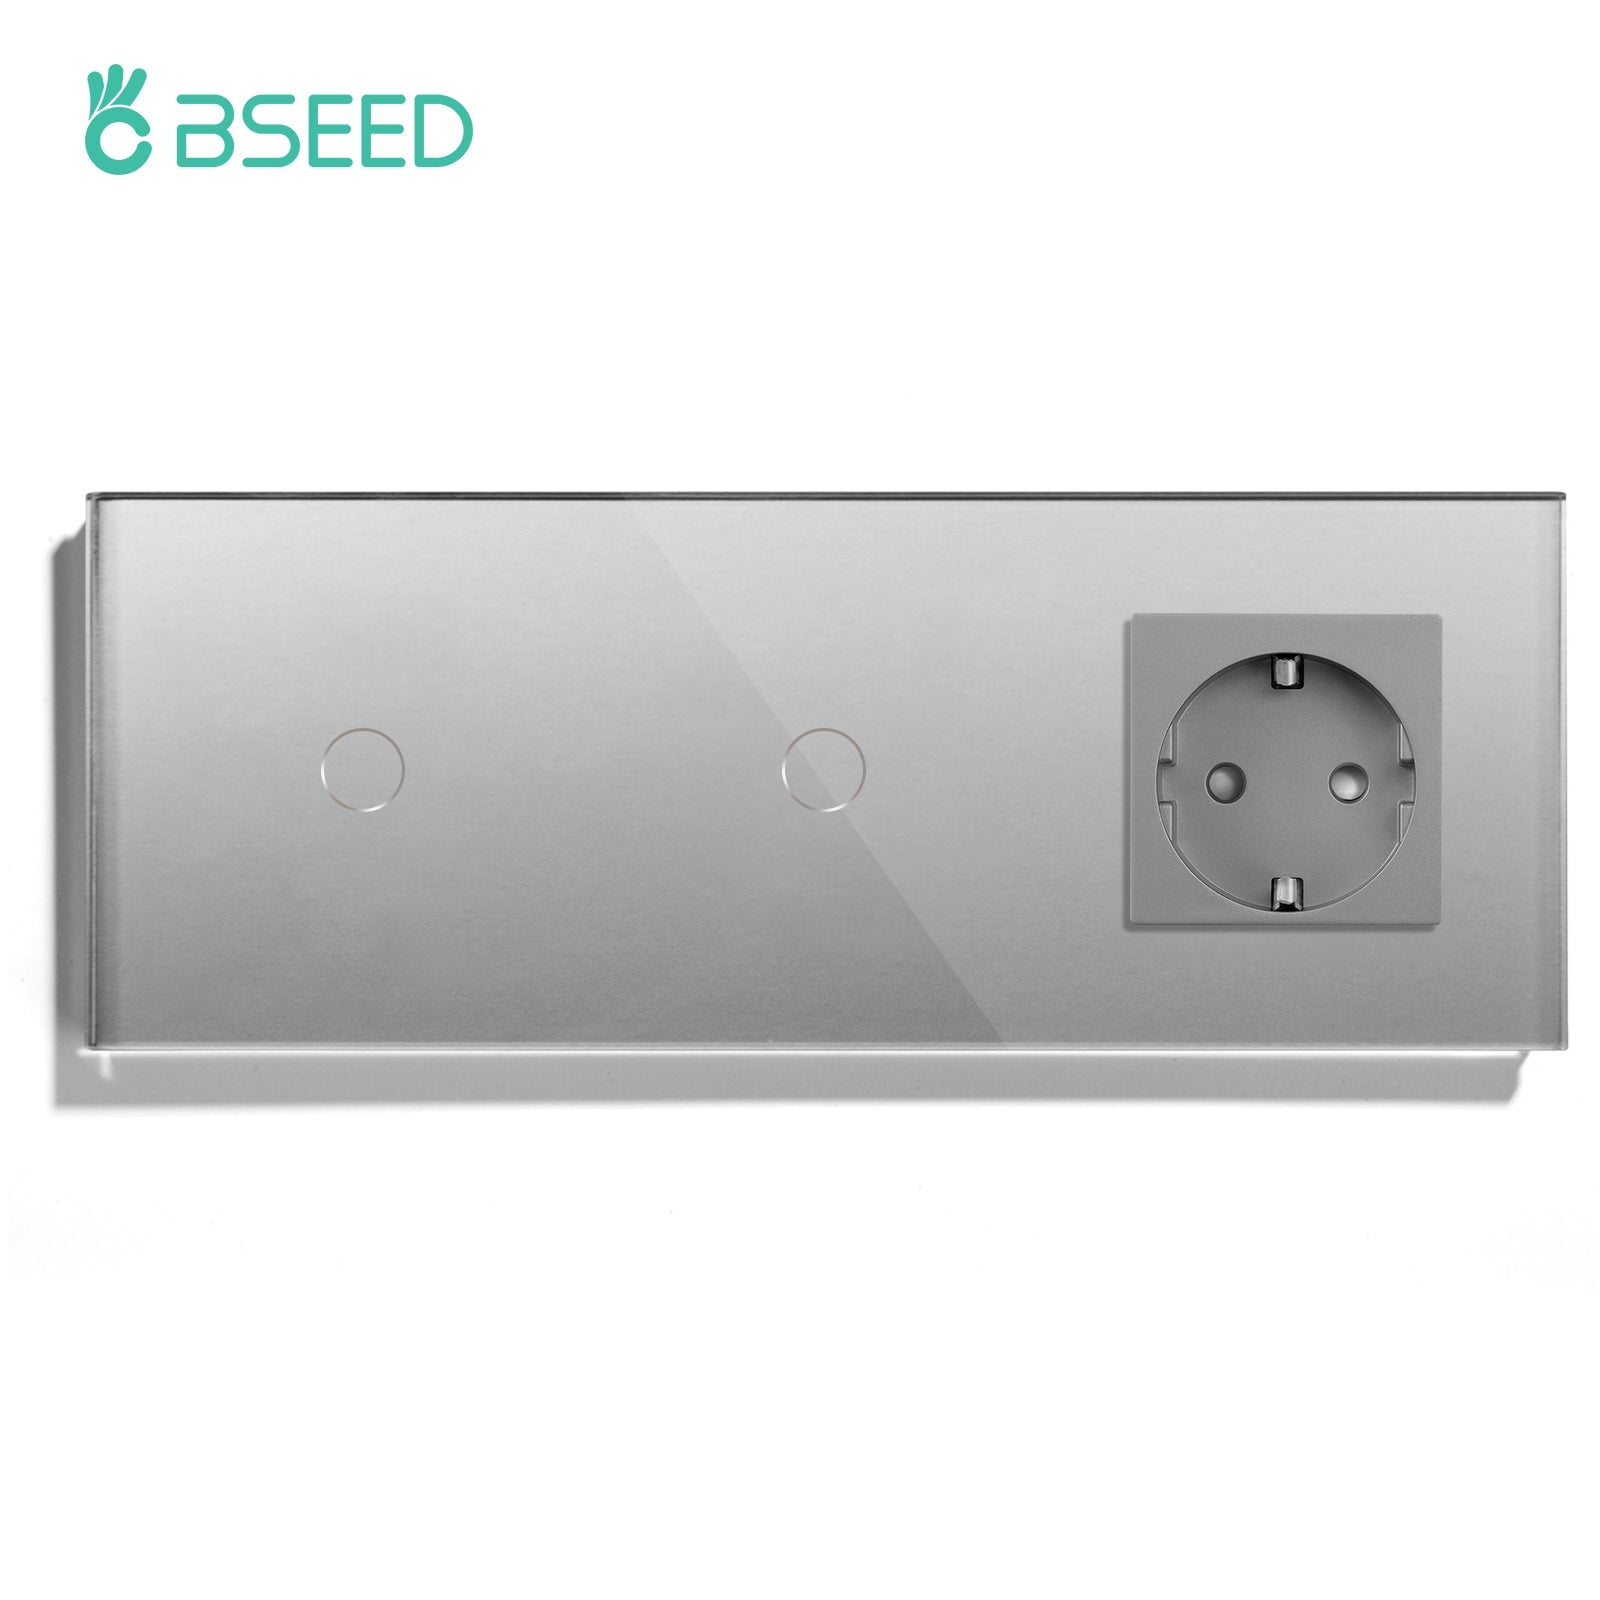 BSEED Double Touch 1/2/3 Gnag 1/2/3 Way Light Switch With EU Socket Power Outlets & Sockets Bseedswitch 